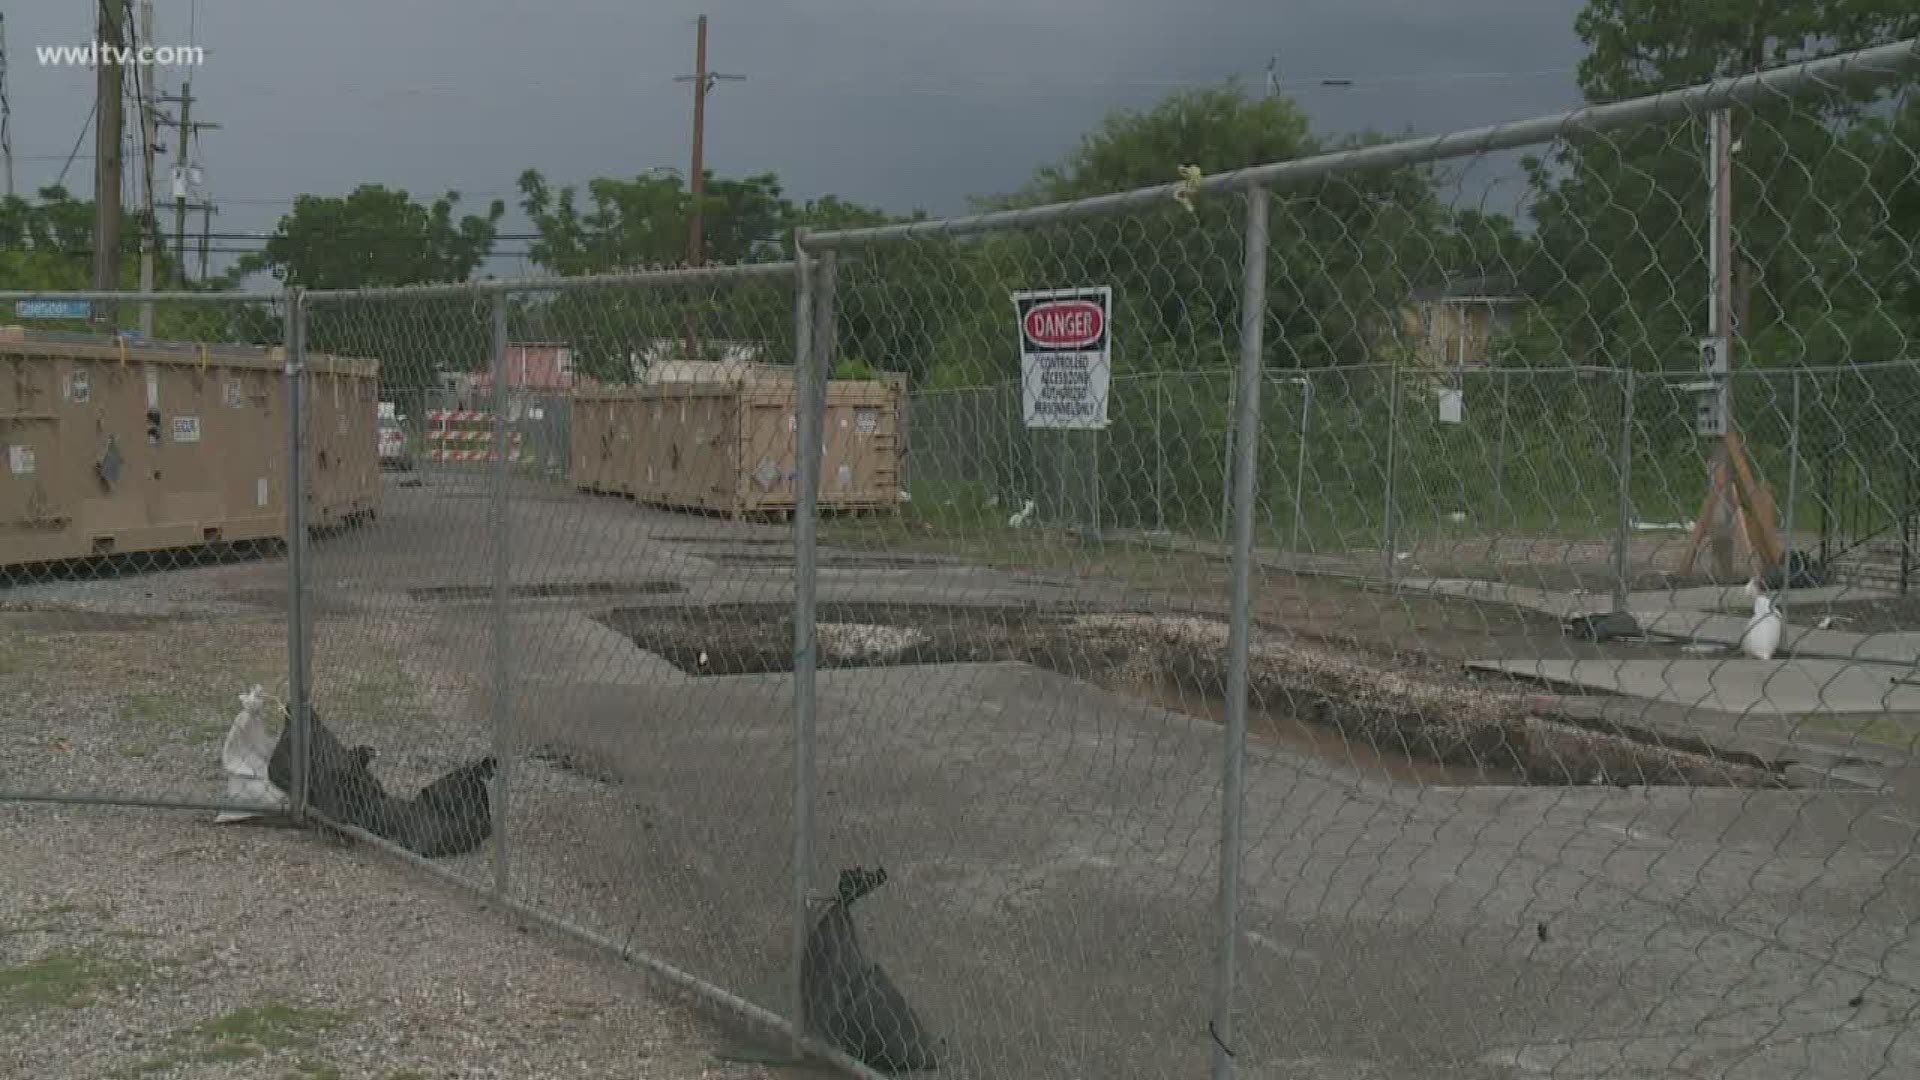 Residents in the Gert Town neighborhood are expressing serious health concerns as crews block off a city street to dig up hazardous materials.